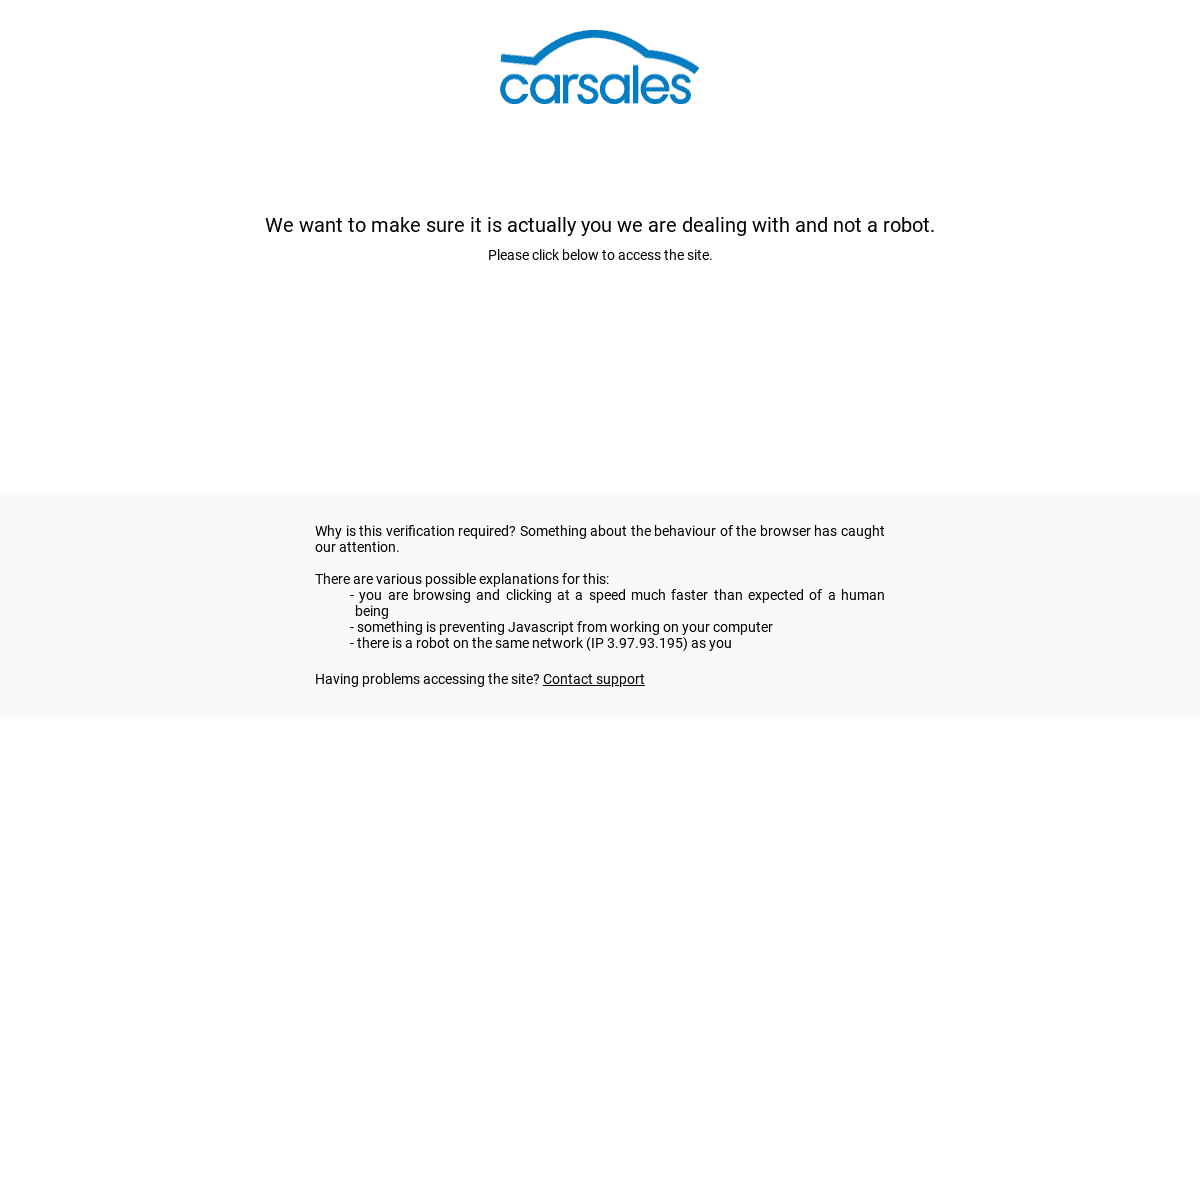 A complete backup of https://carsales.com.au